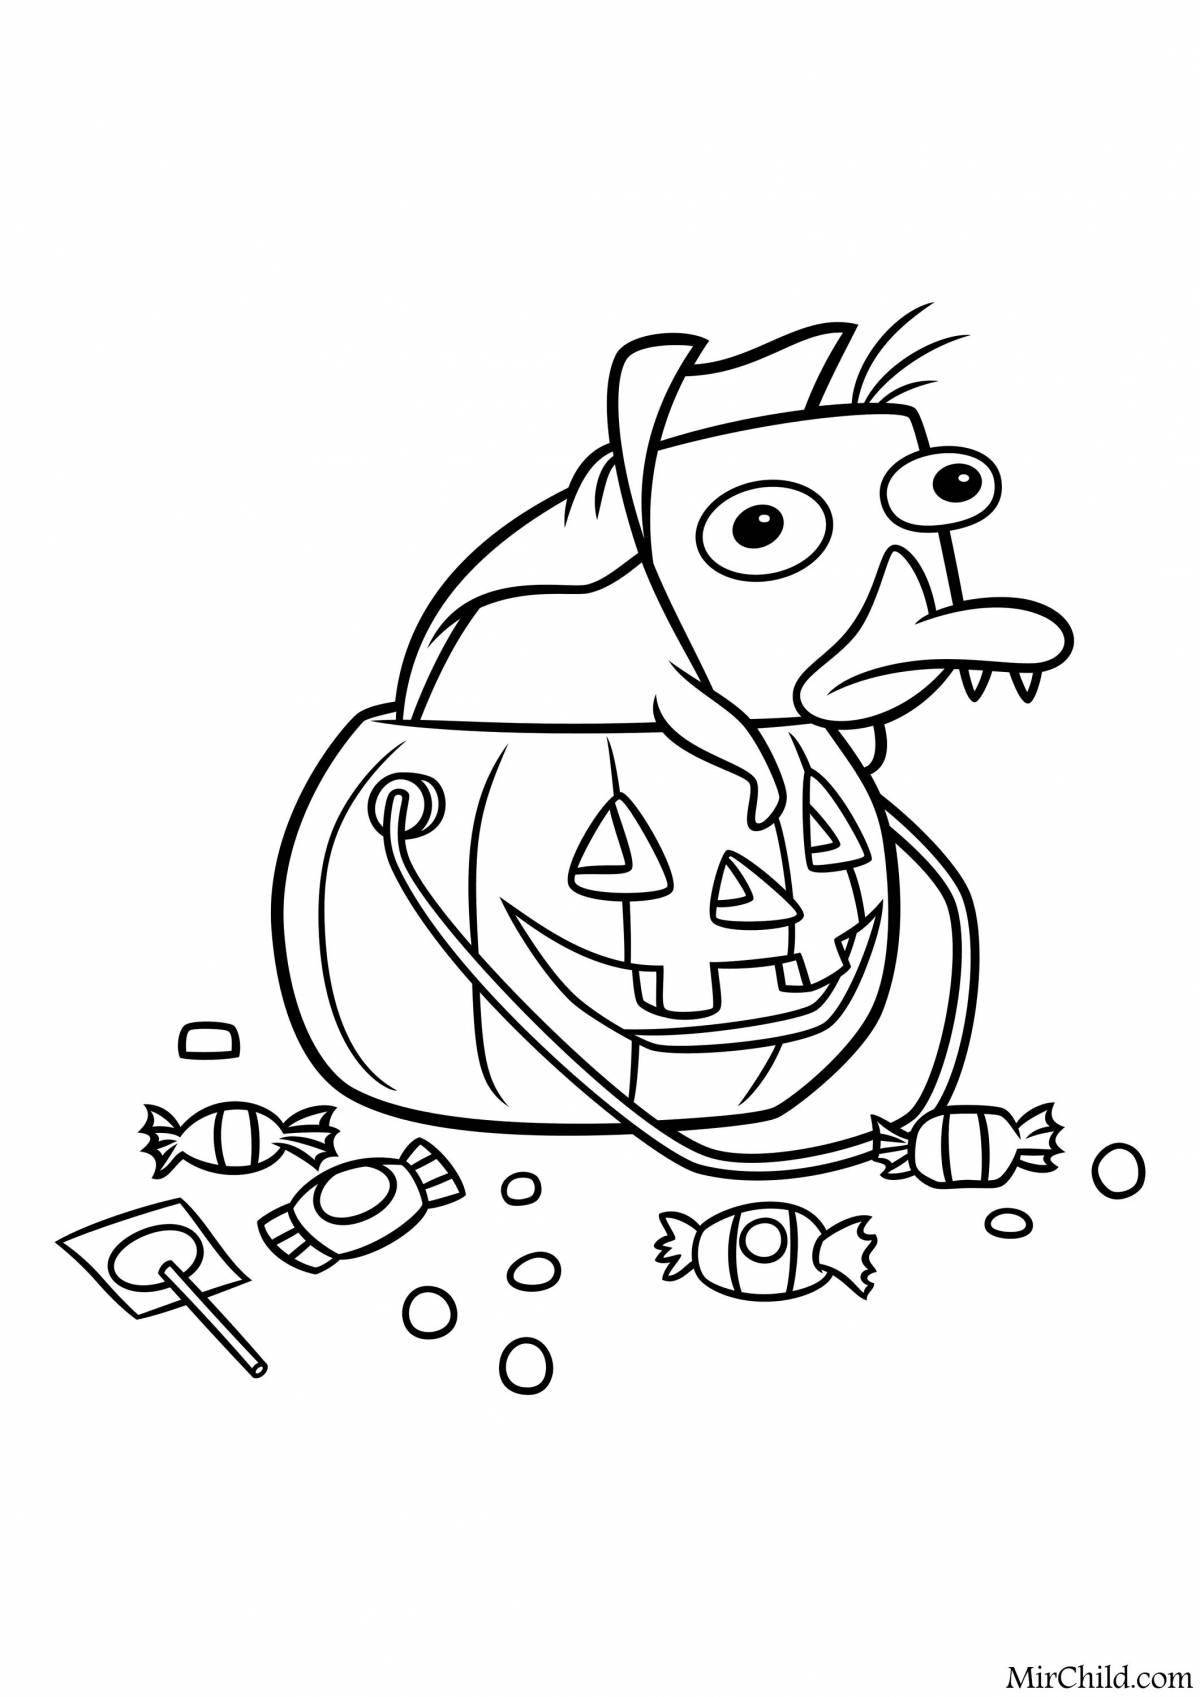 Perry the playful platypus coloring page